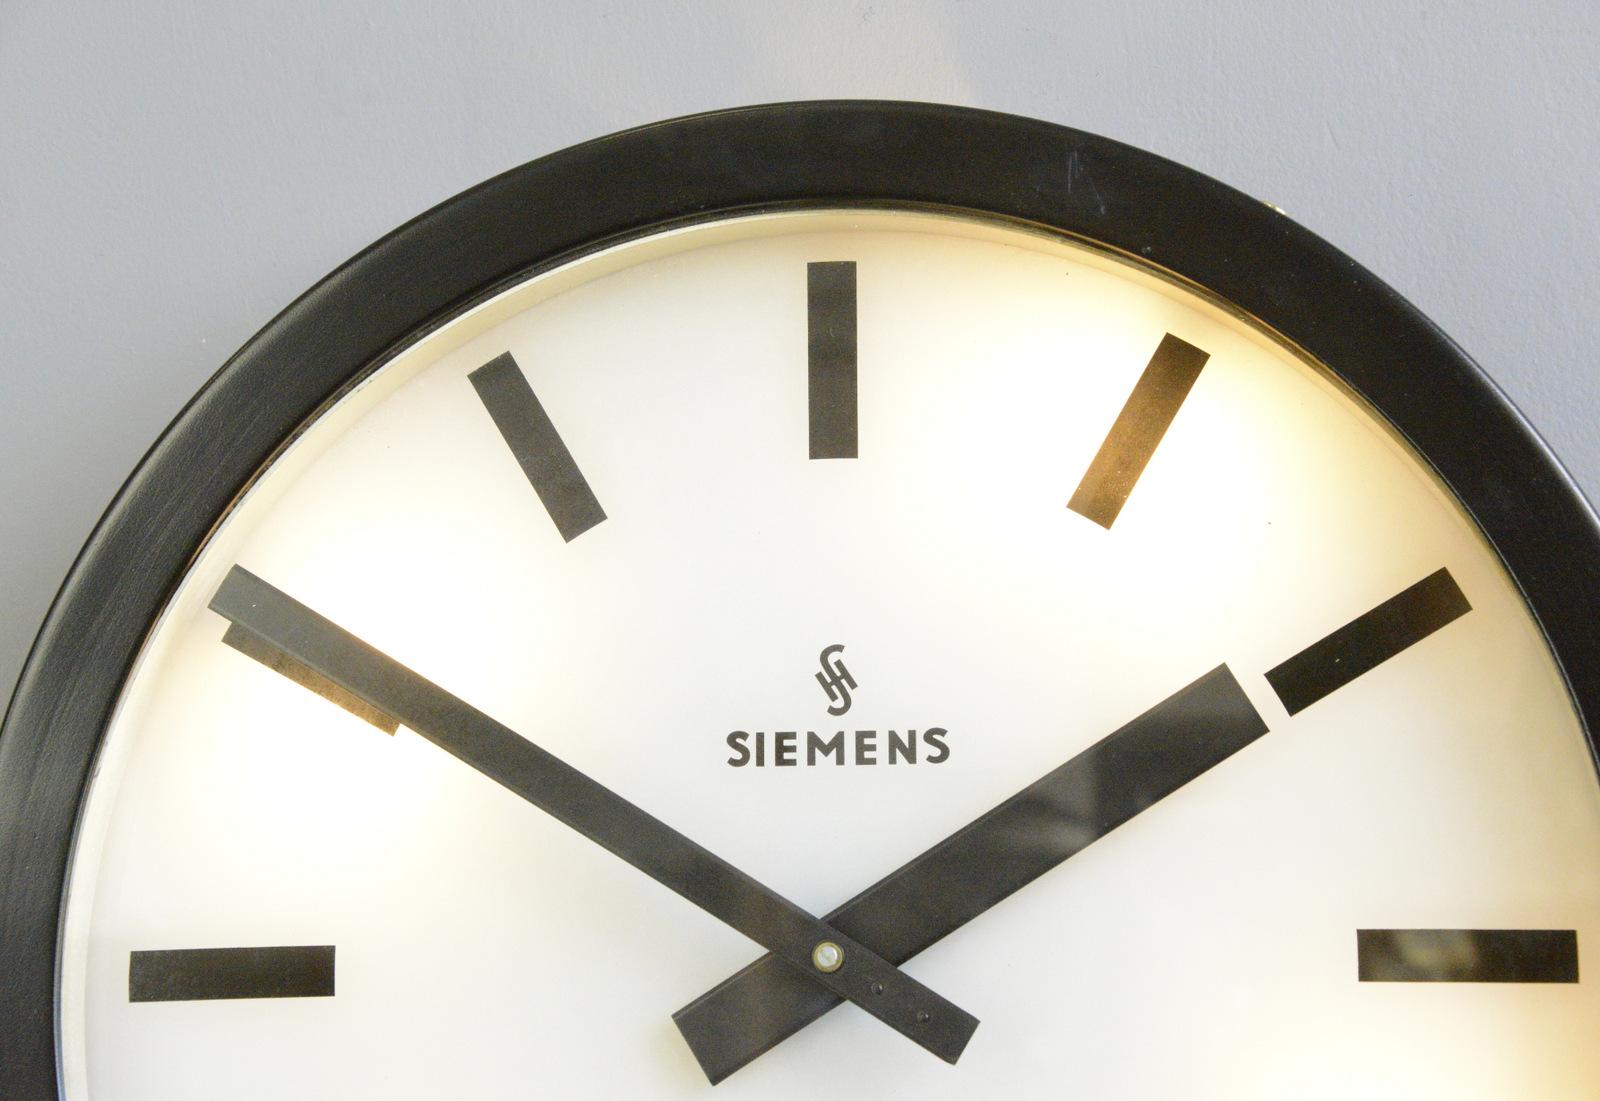 Large light up factory clock by Siemens, Circa 1960s

- Aluminium casing
- Glass face and dial
- Original hands
- New AA battery powered quartz motor
- Made by Siemens 
- German, 1960s
- Measures: 57cm wide x 8cm deep

Condition